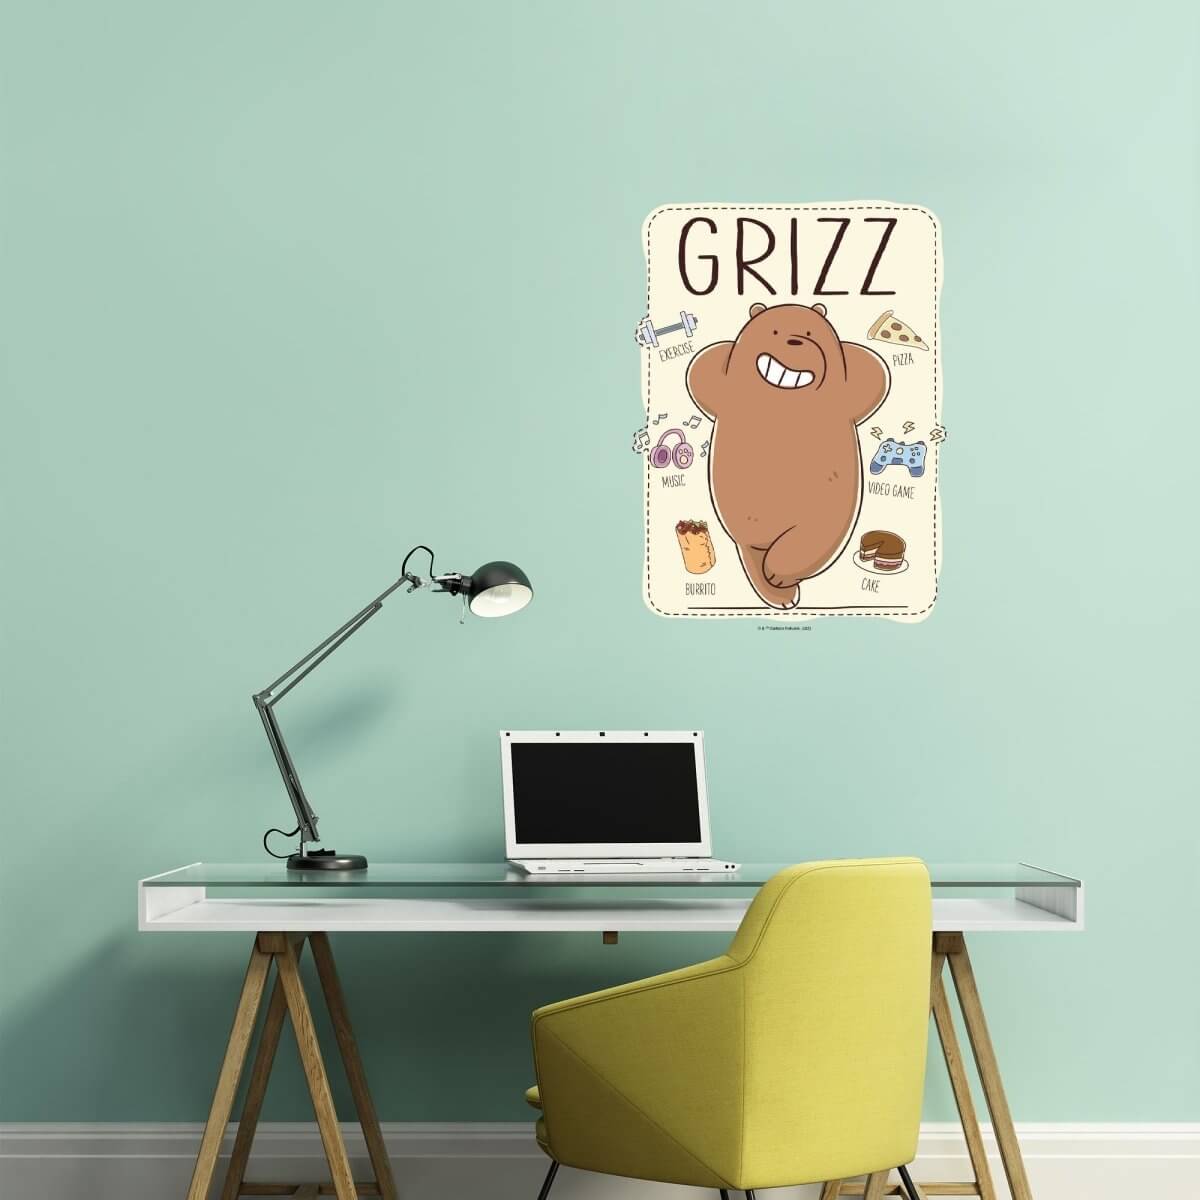 Kismet Decals Home & Room Decor We Bare Bears Grizzly's Favorites Wall decal sticker - officially licensed - latex printed with no solvent odor - Kismet Decals